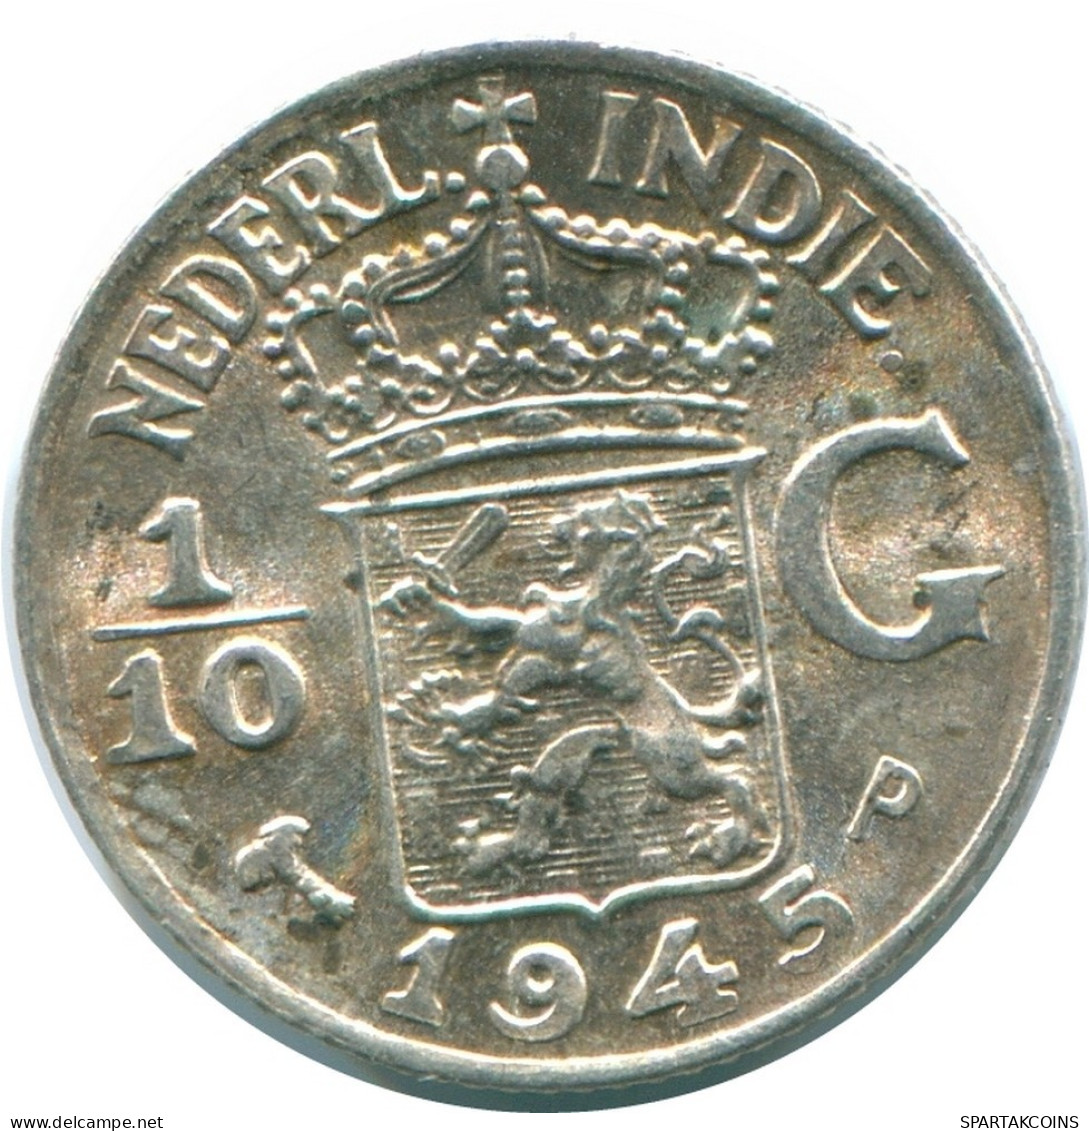 1/10 GULDEN 1945 P NETHERLANDS EAST INDIES SILVER Colonial Coin #NL14009.3.U.A - Dutch East Indies